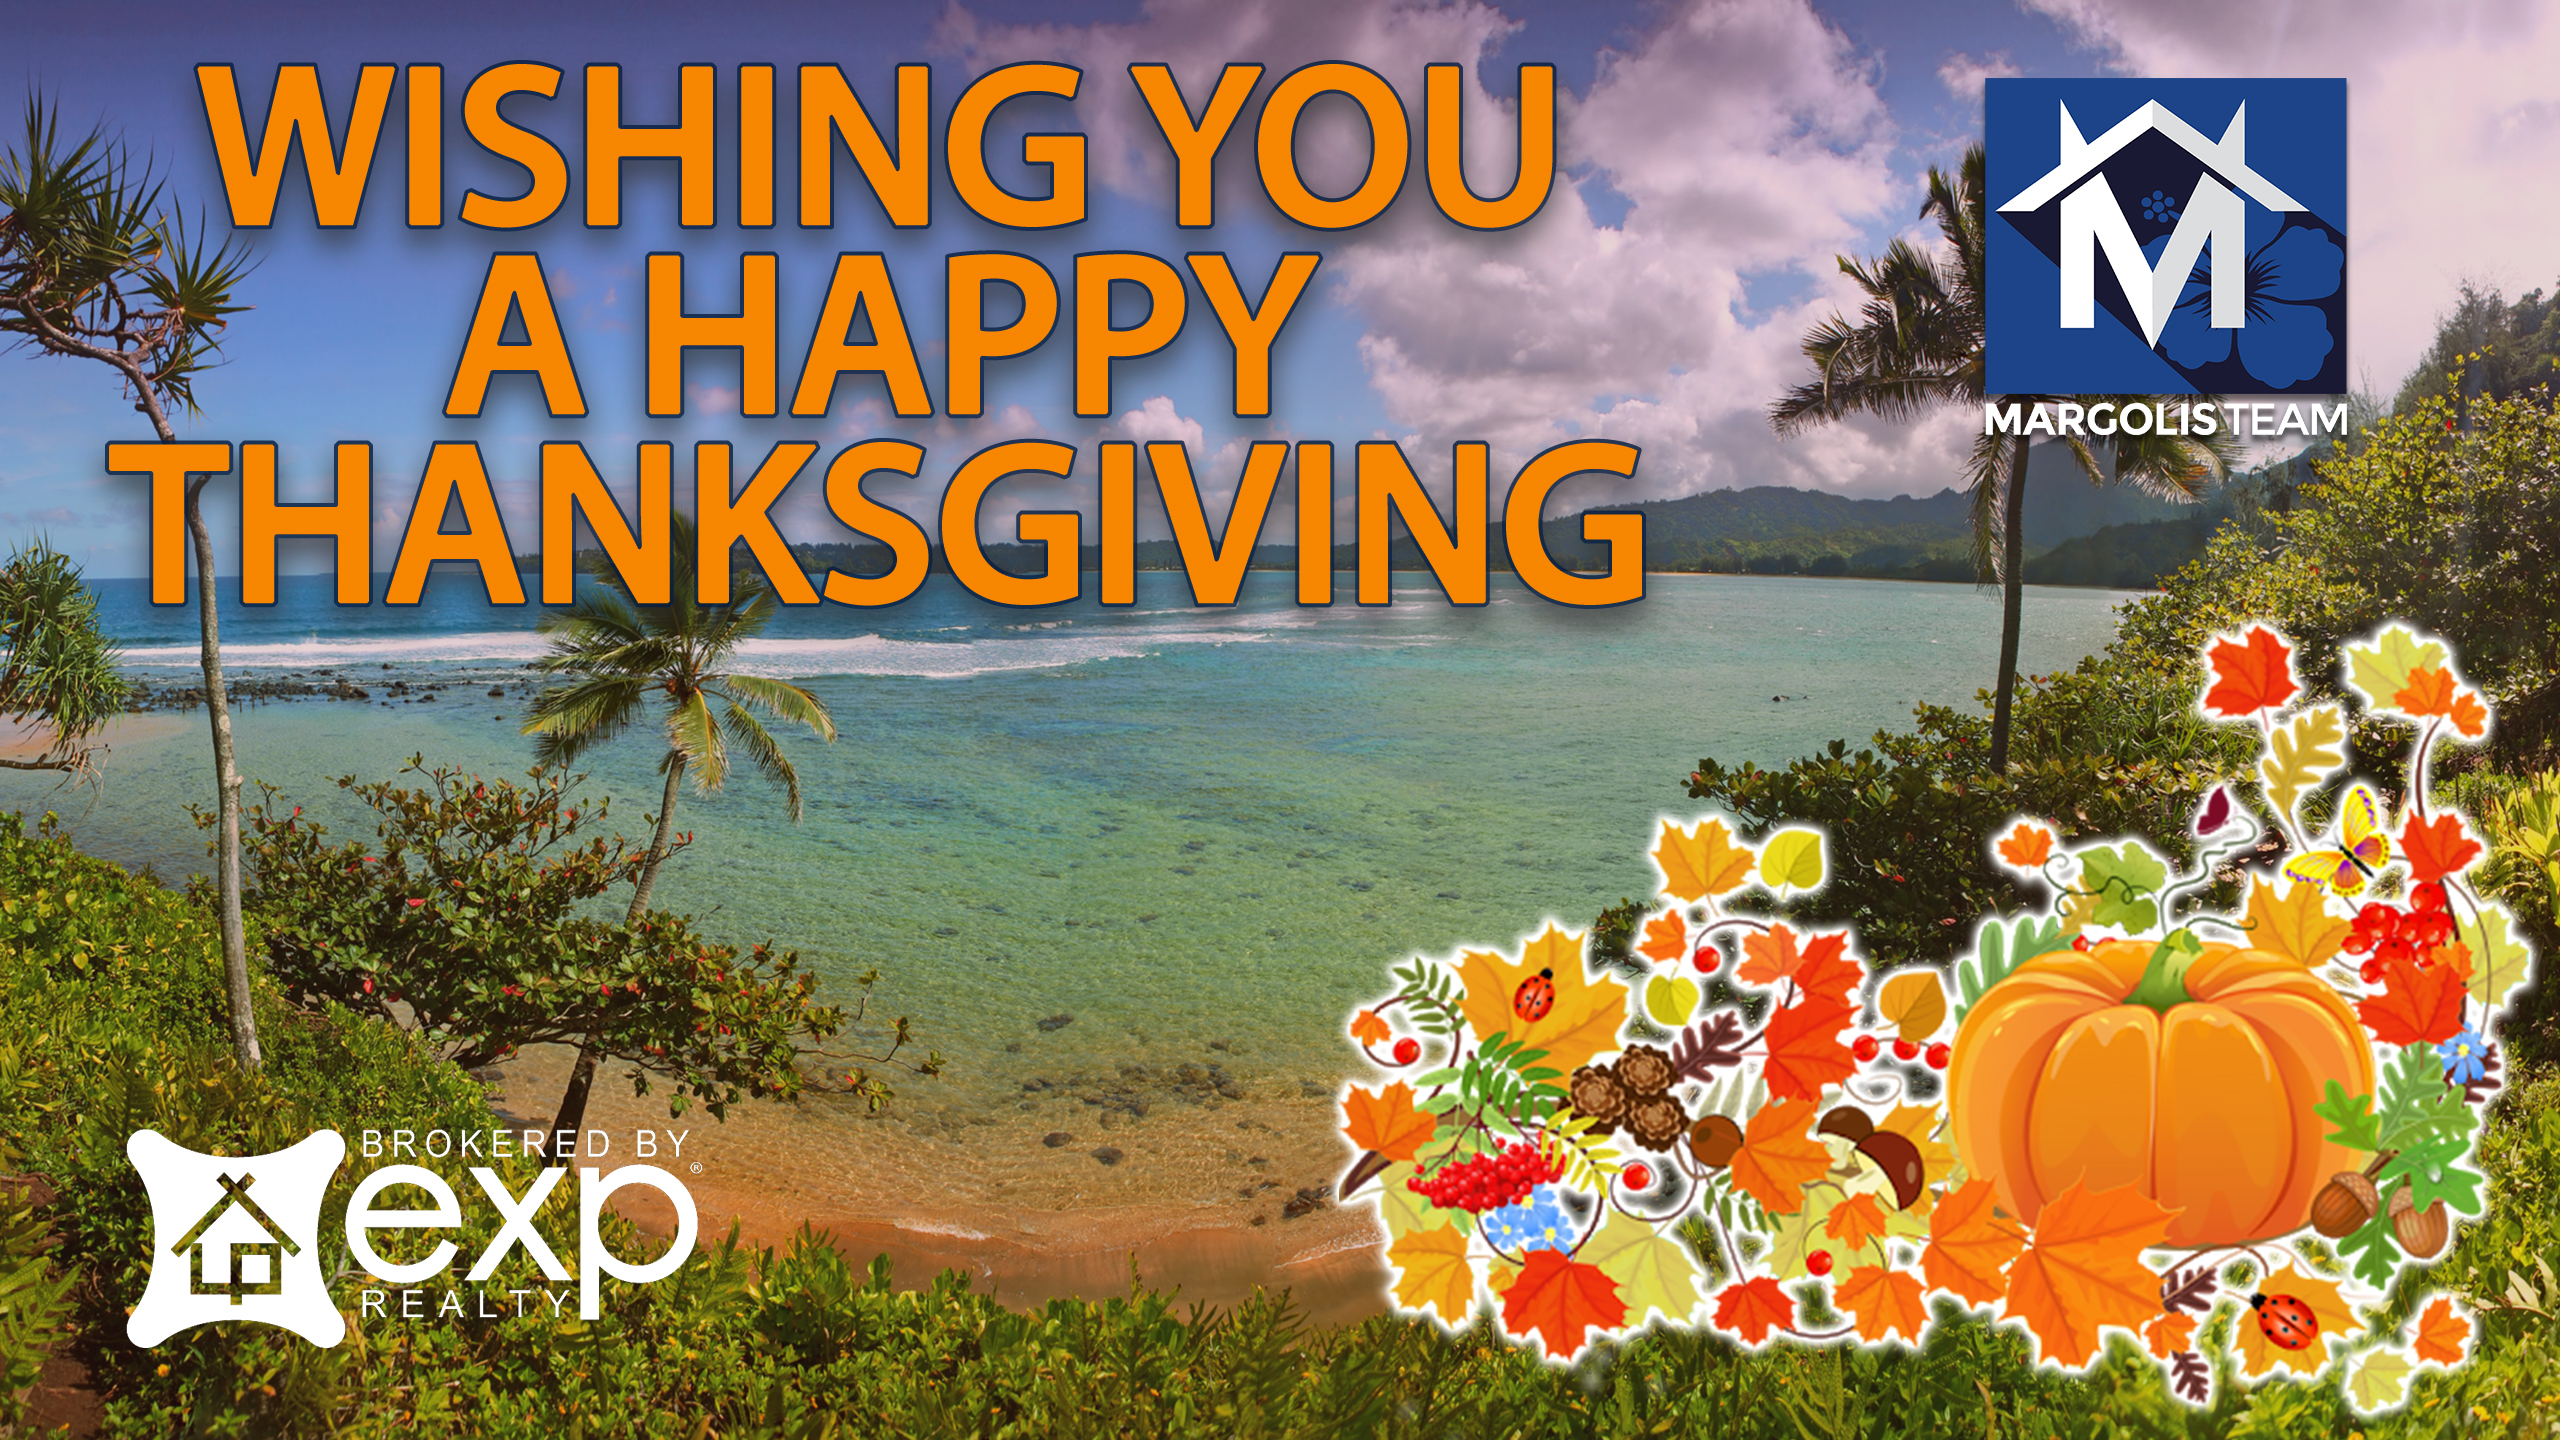 Wishing you a happy Thanksgiving